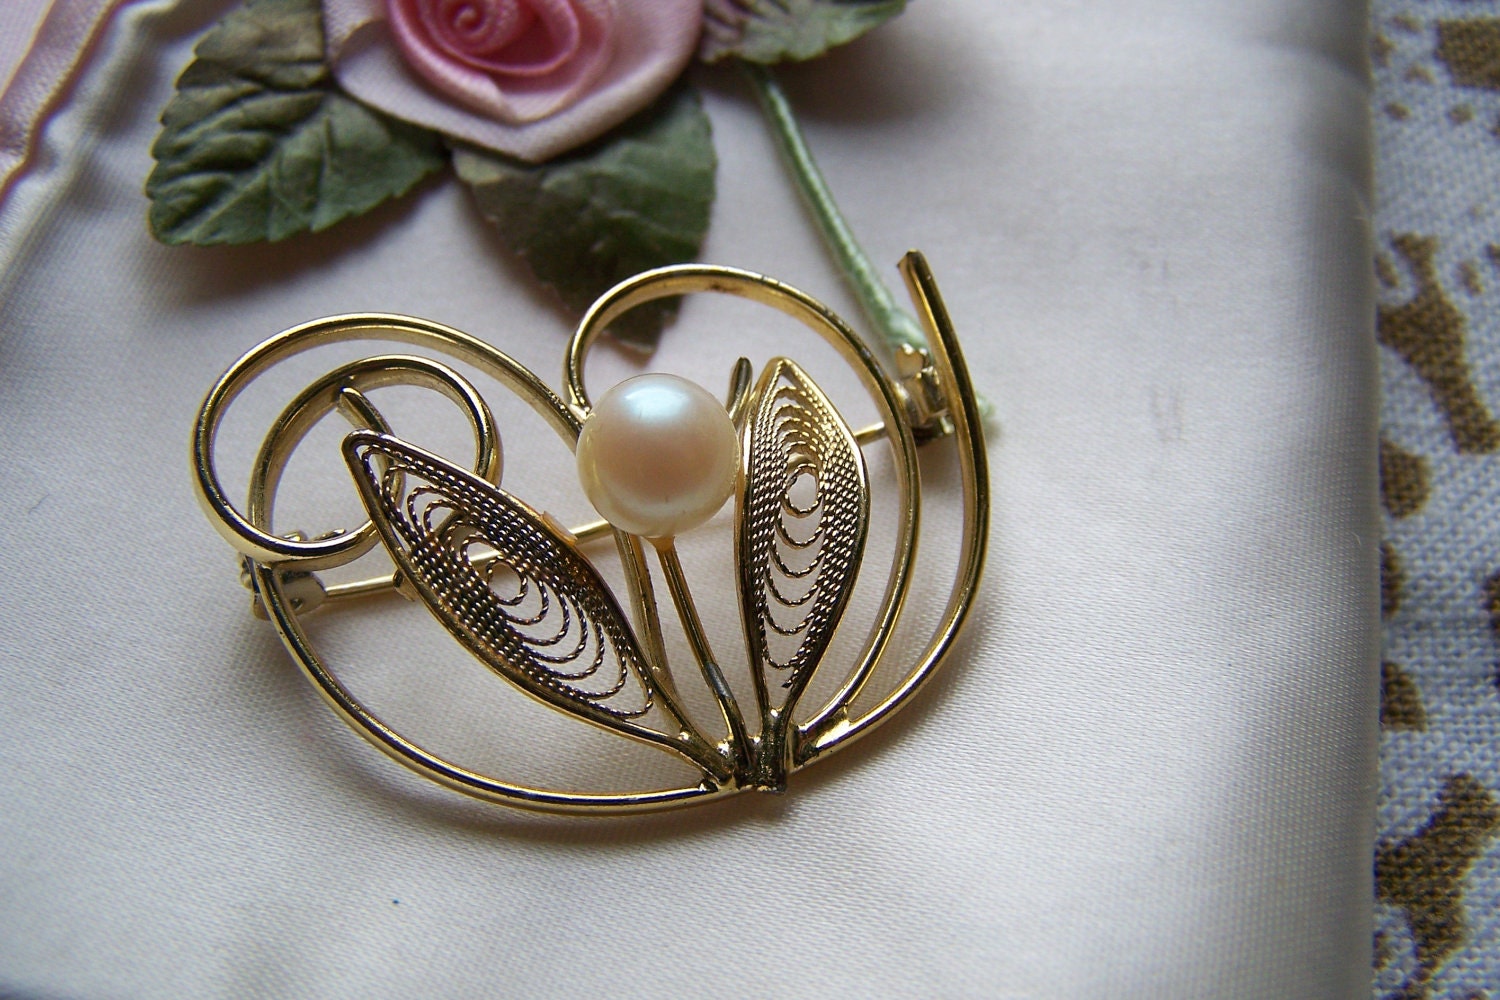 Vintage 70’s “OPEN WEAVE PEARL” Brooch Gold Toned Flower Setting Style